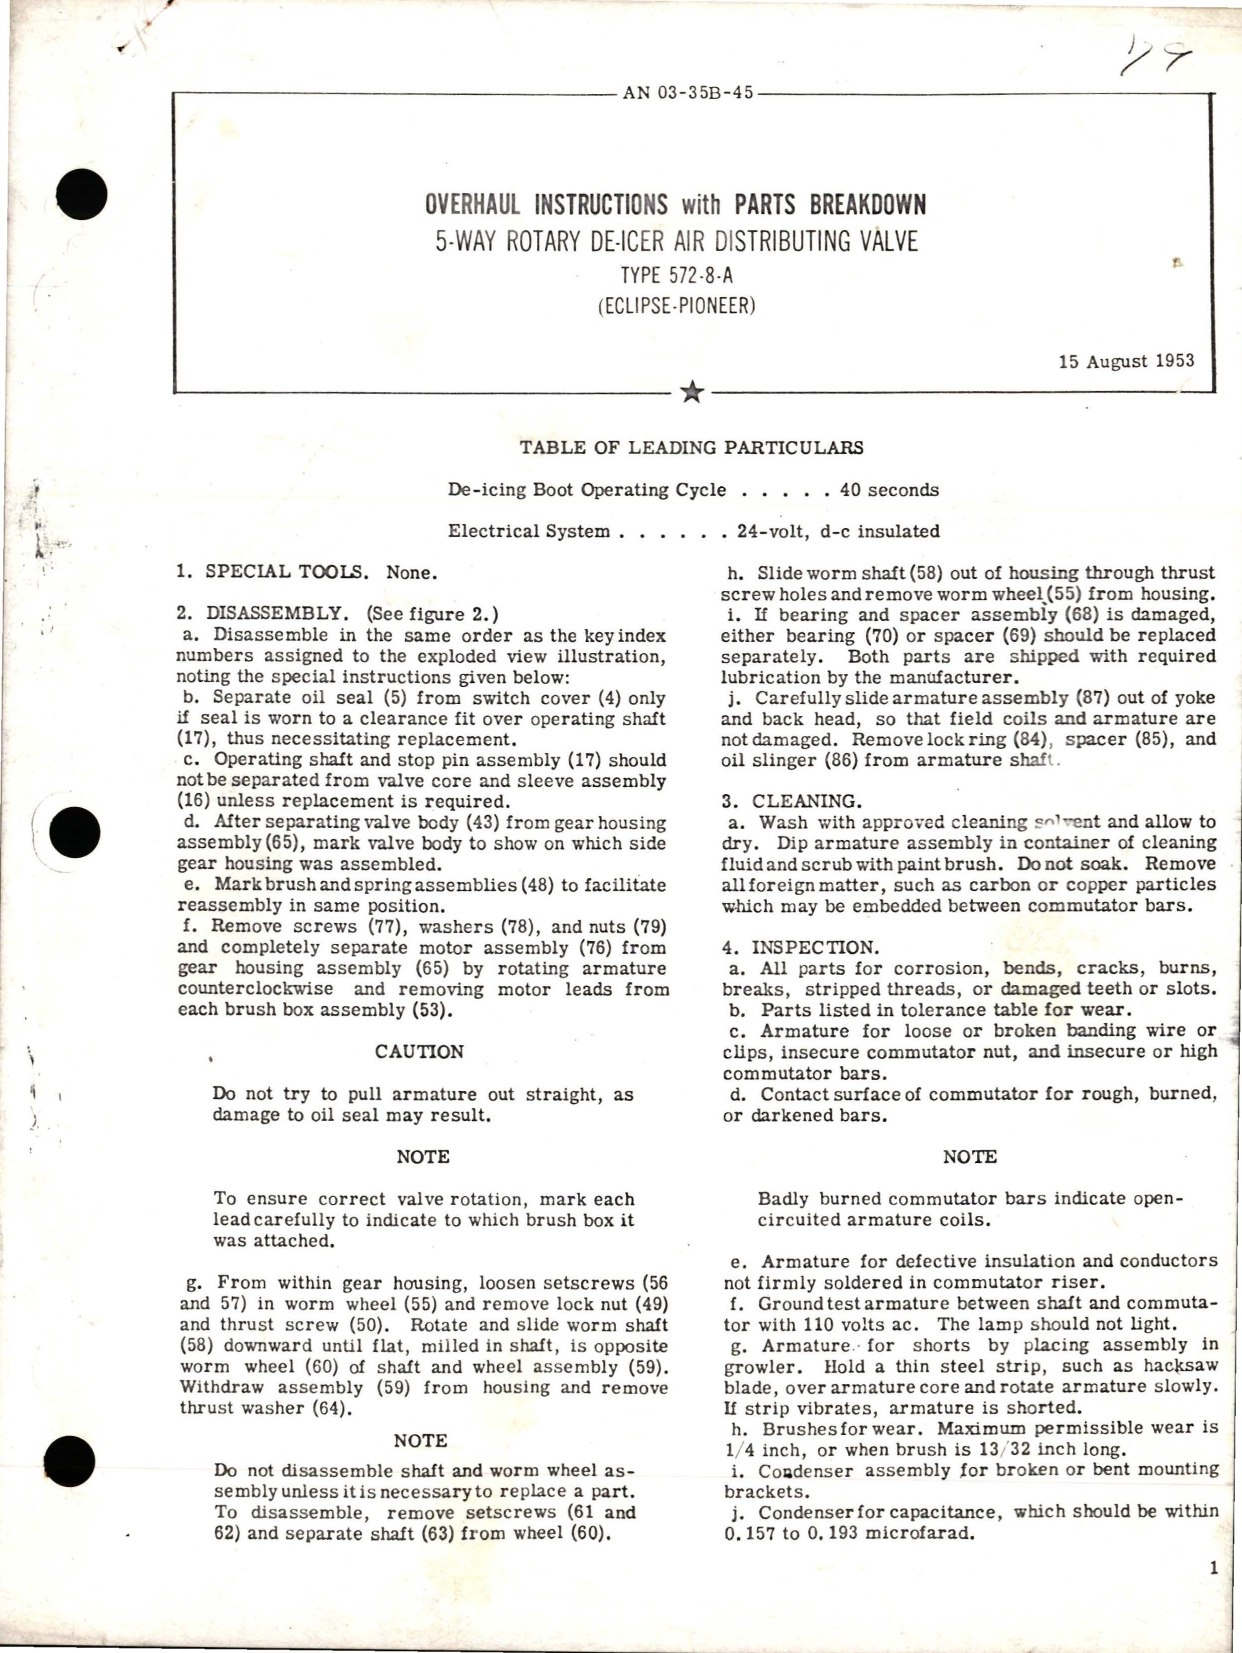 Sample page 1 from AirCorps Library document: Overhaul Instructions with Parts Breakdown for 5-Way Rotary De-Icer Air Distributing Valve - Type 572-8-A